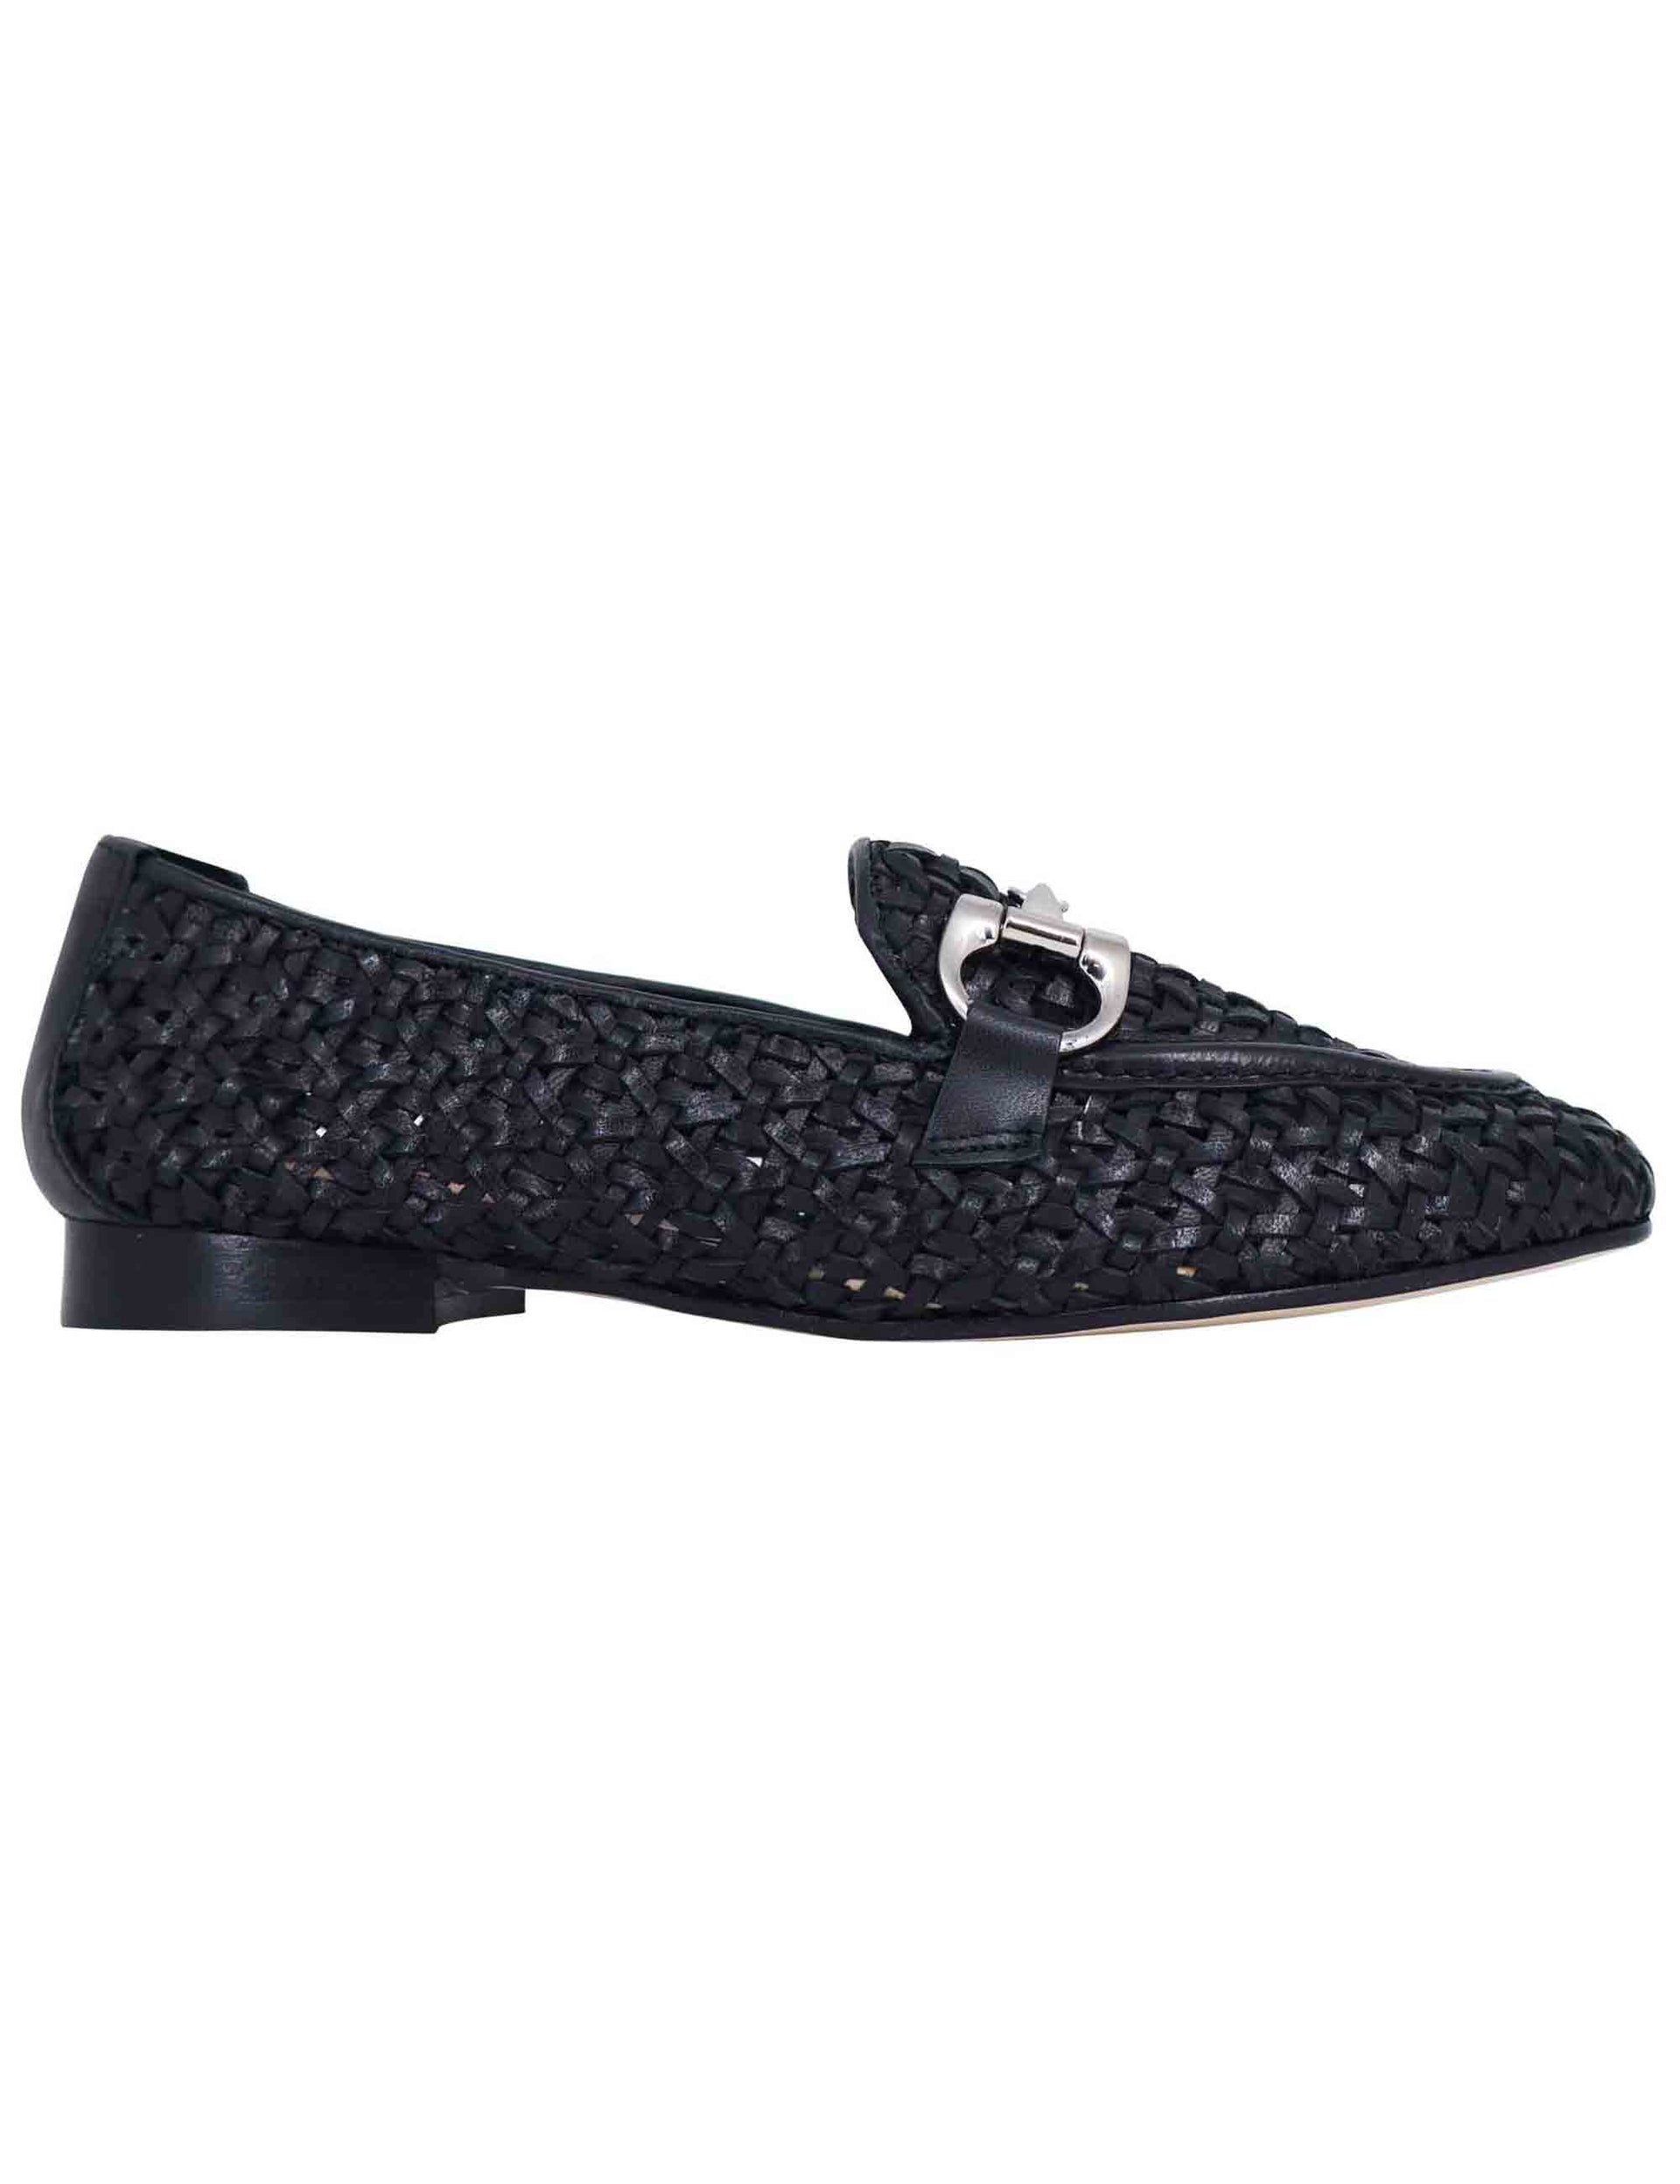 Women's loafers in black woven and perforated leather with silver clamp